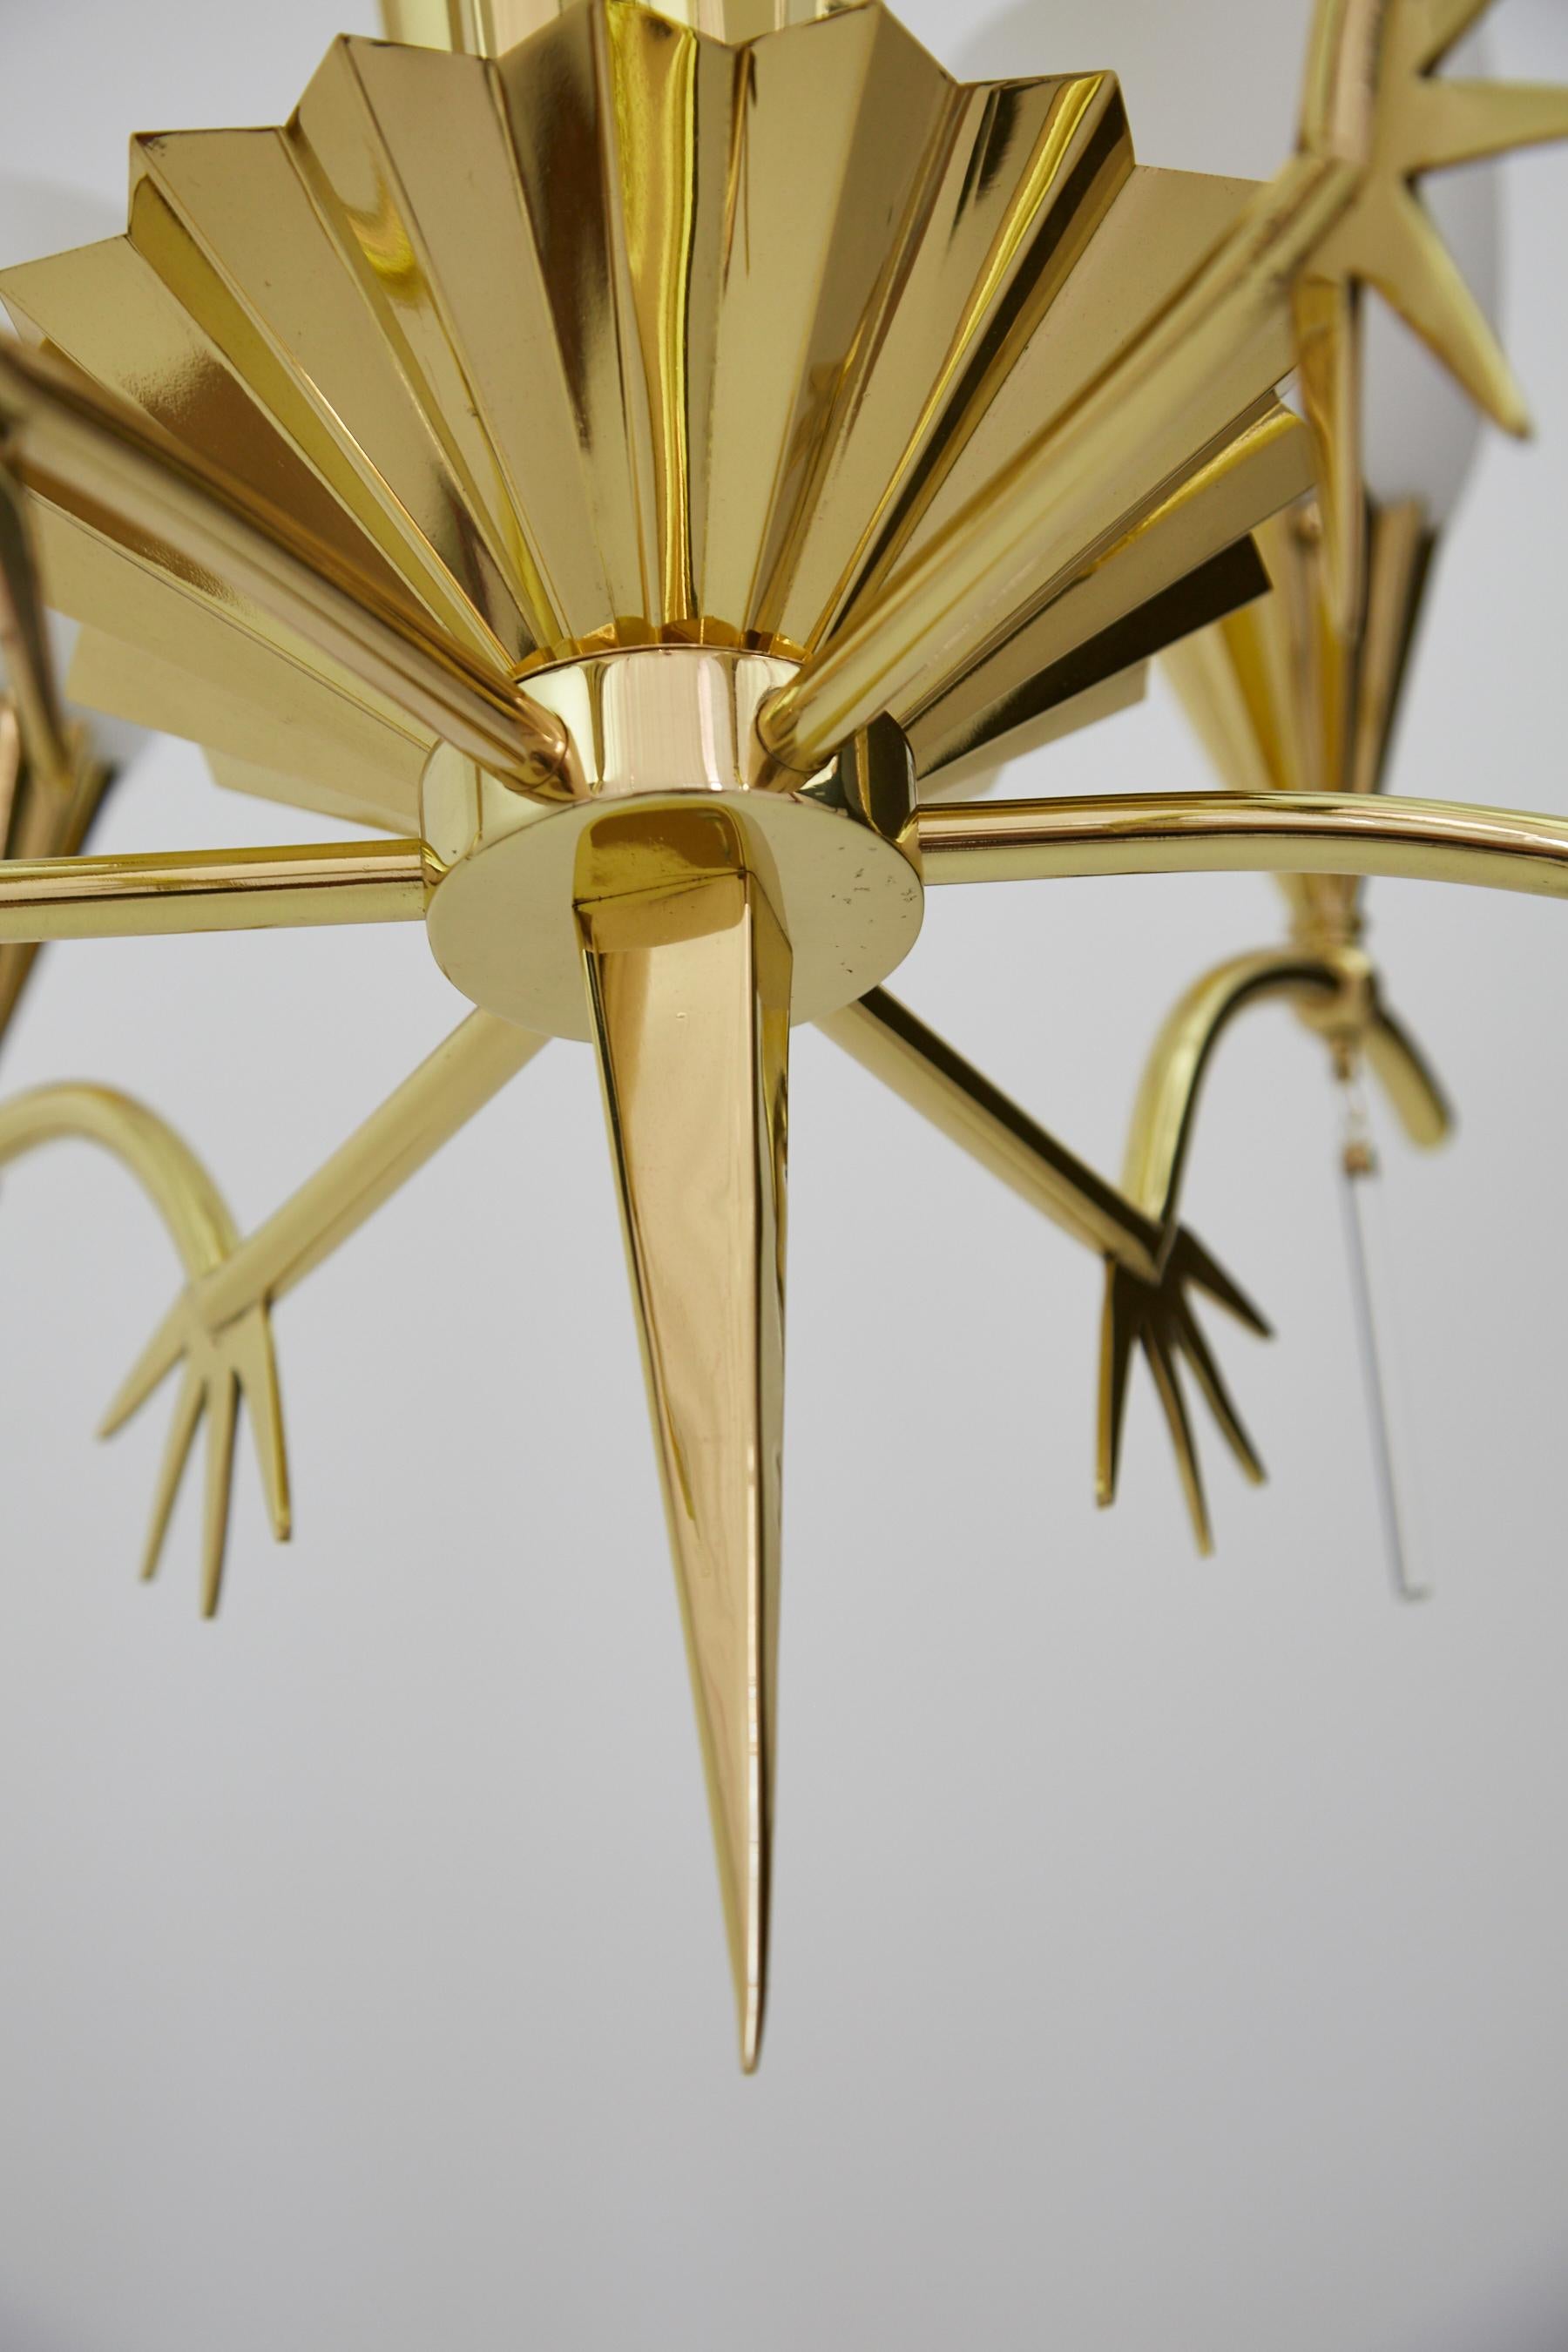 Six-Arm Italian Brass Chandelier with Decorative Spikes, 1940s For Sale 2